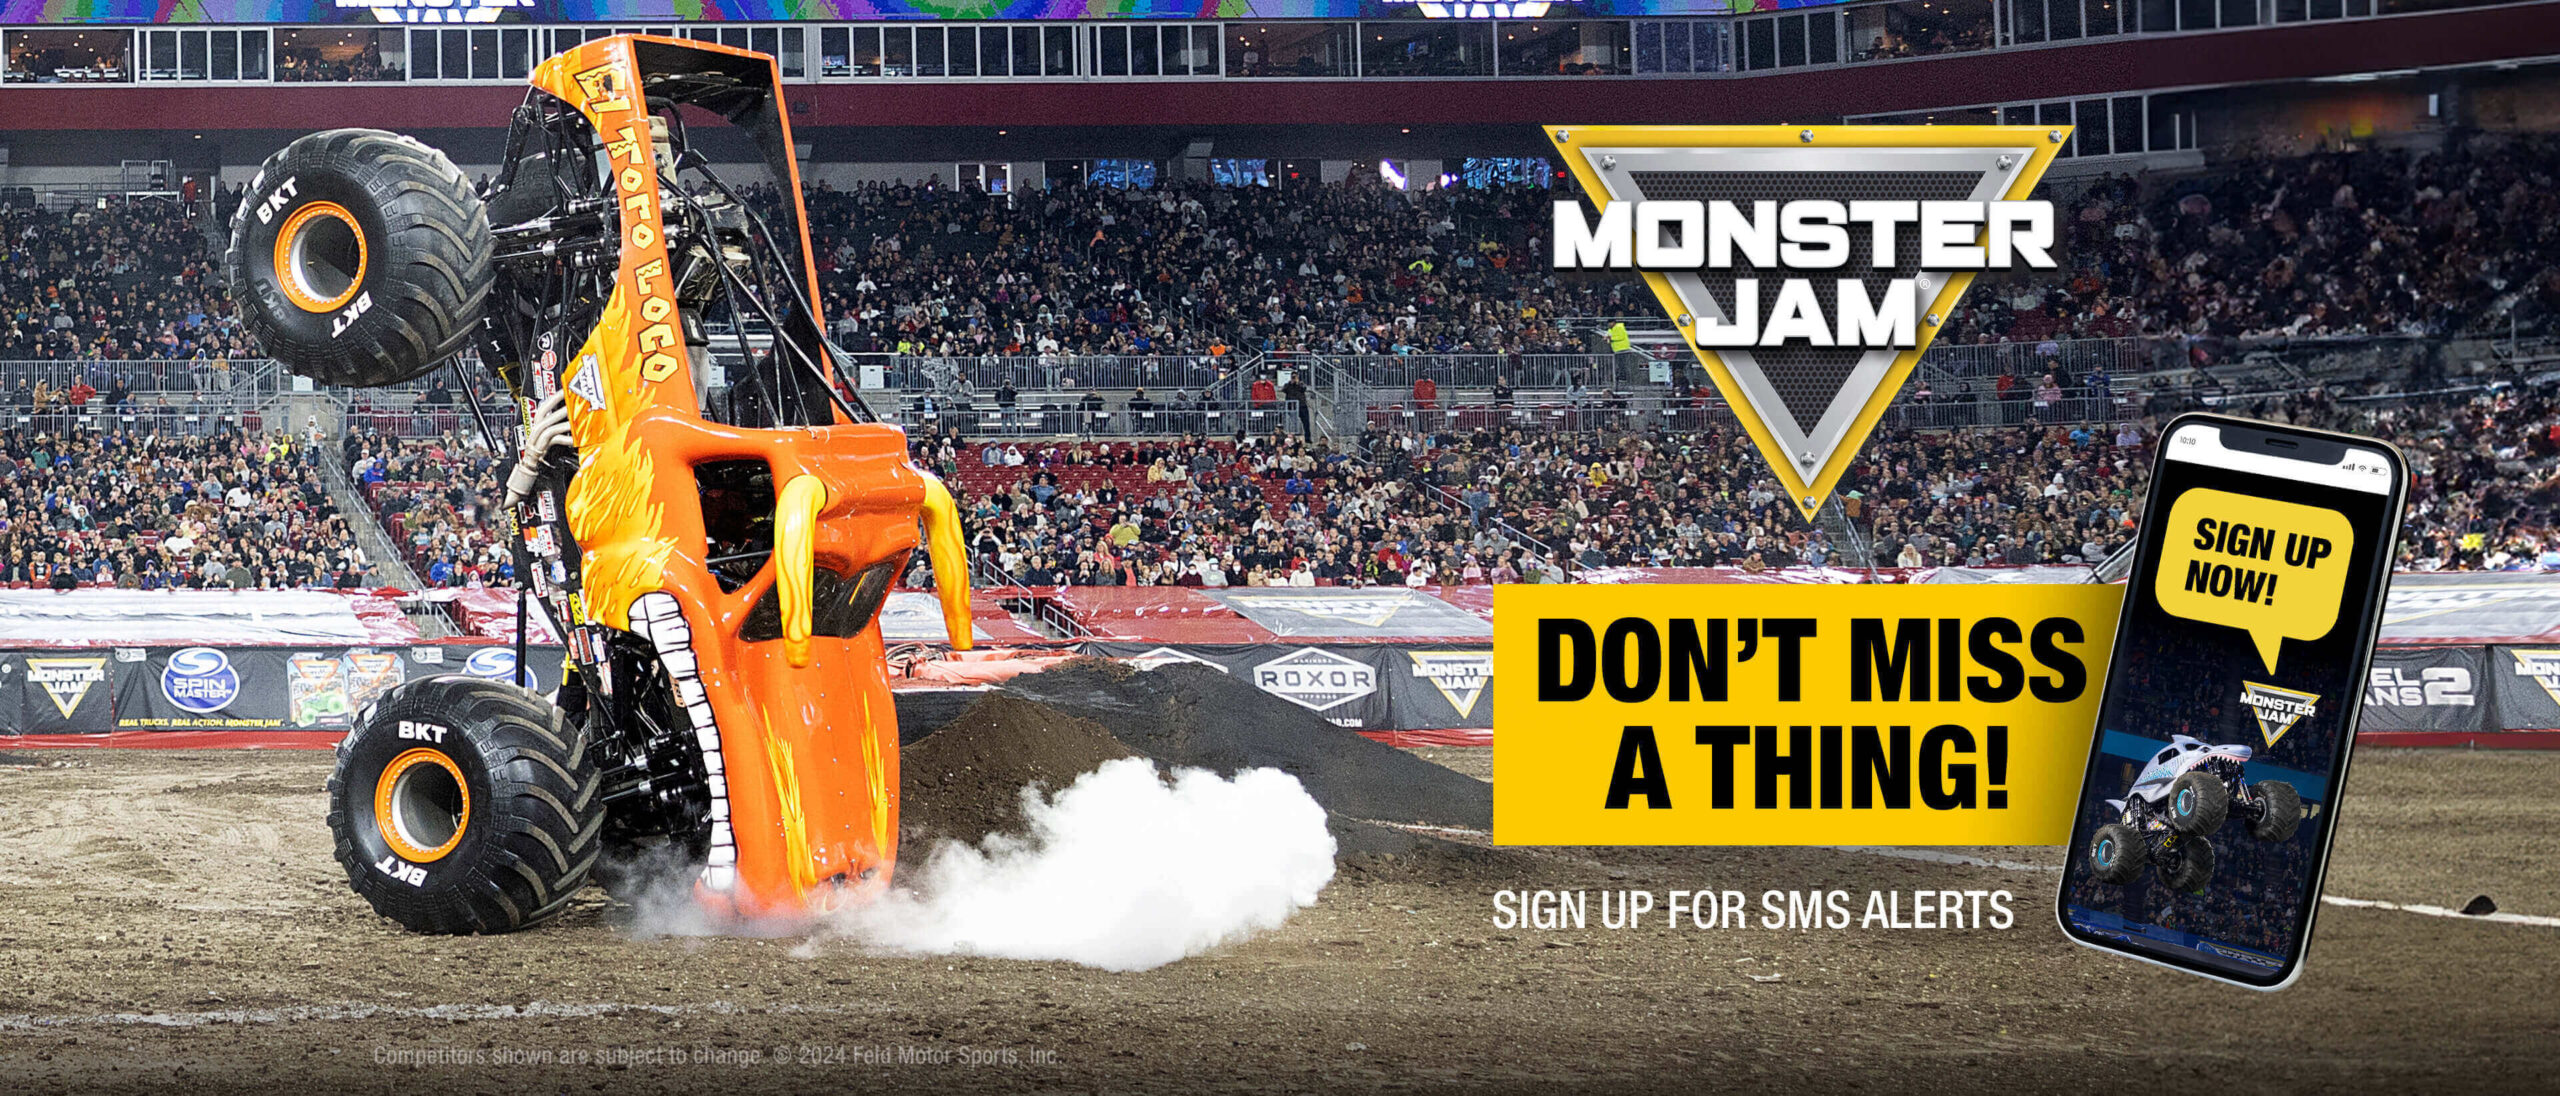 Image of El Toro Loco with caption: Monster Jam - Don't Miss a Thing - Sign up for SMS alerts